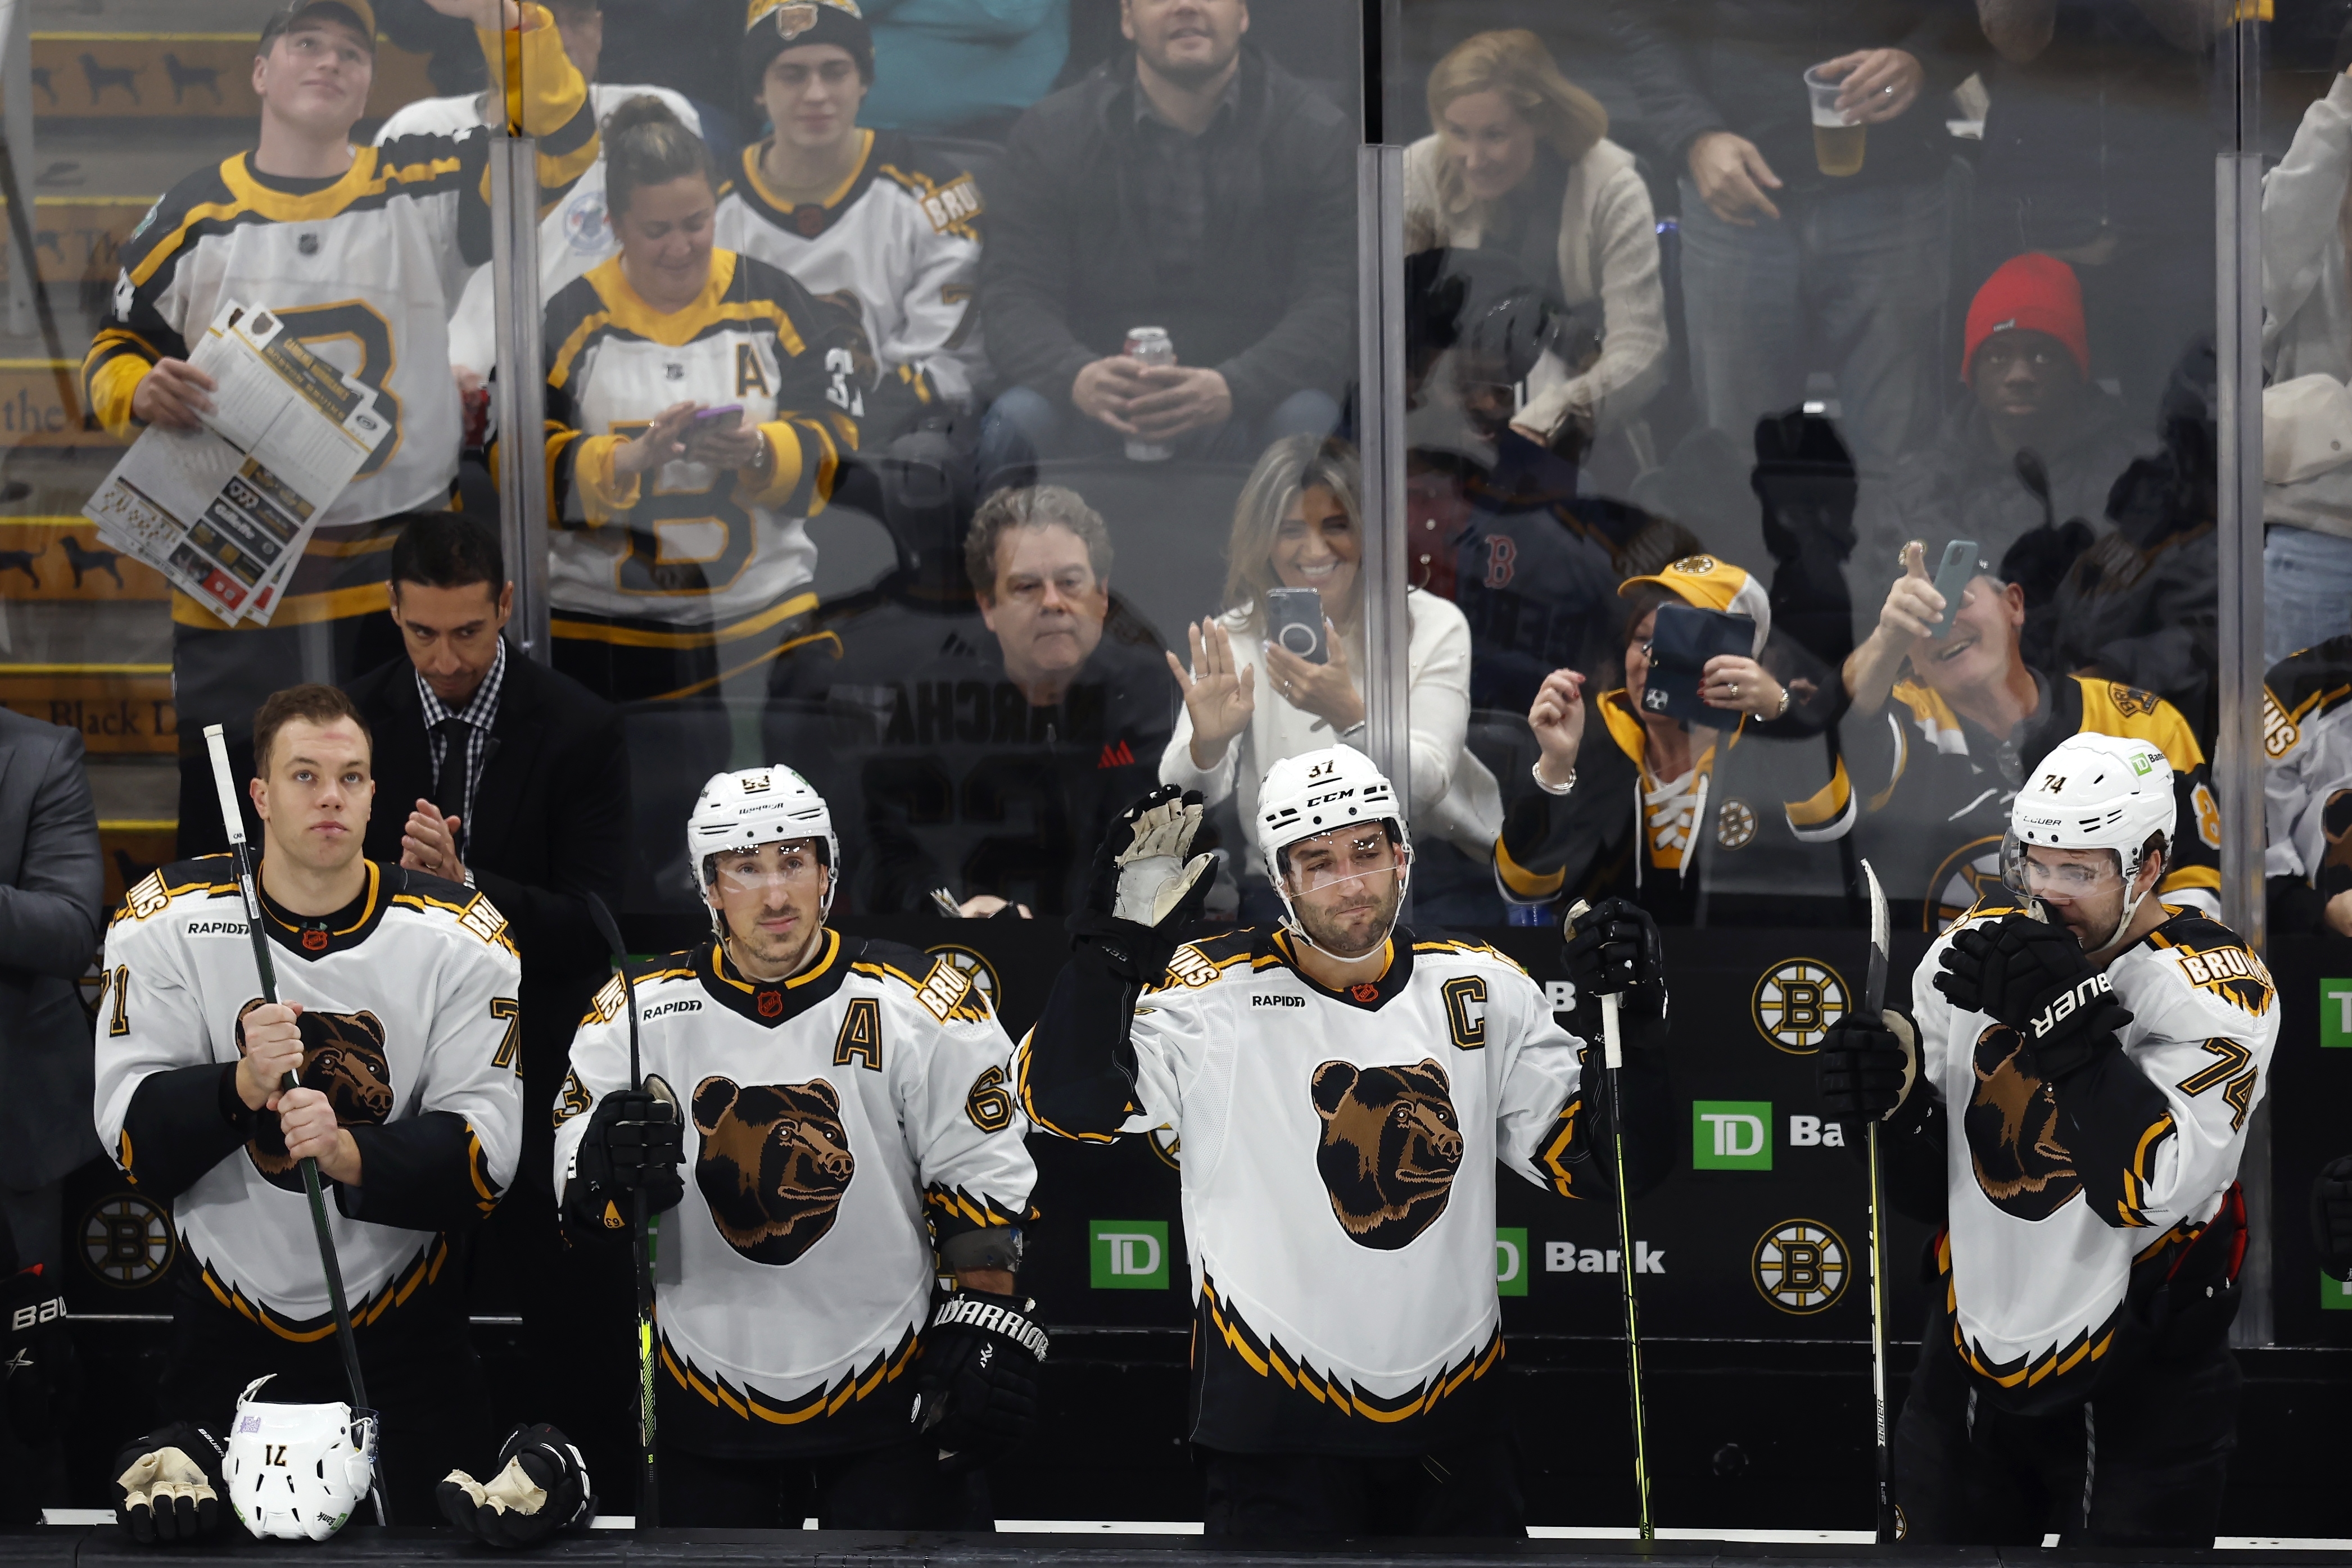 You just feed off of that': What Patrice Bergeron's Four-Goal